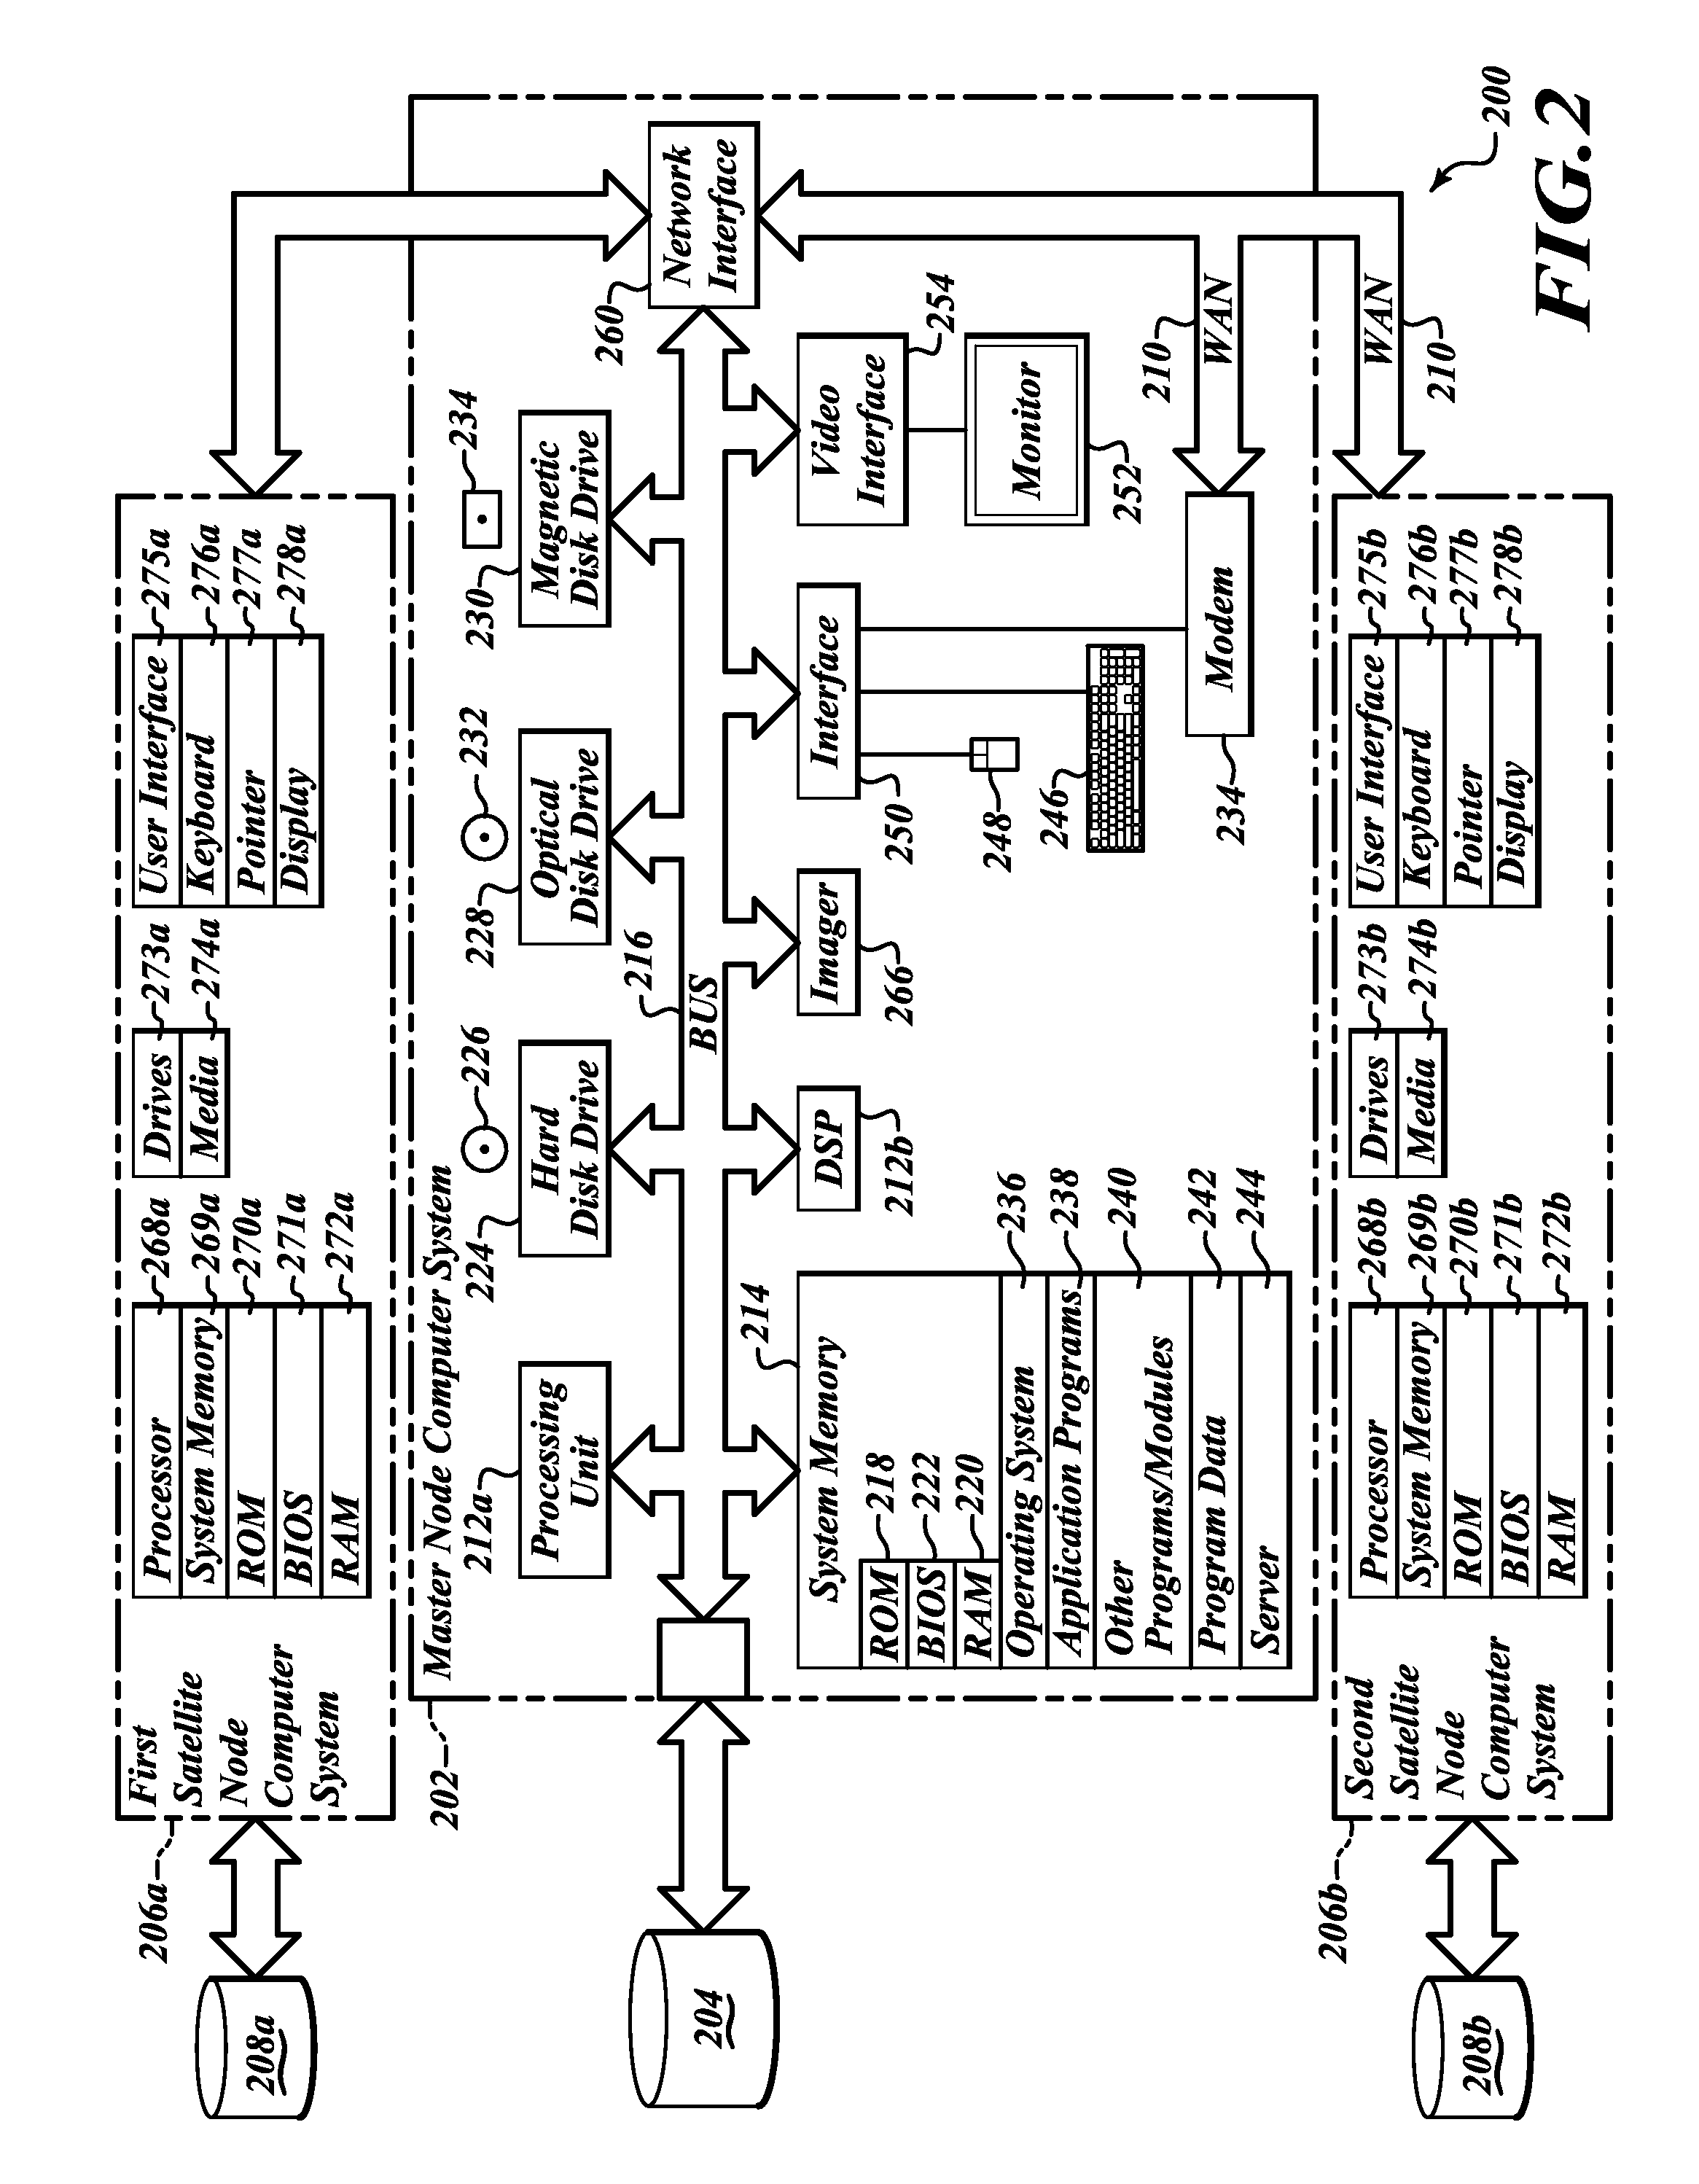 Apparatus, method and article to manage electronic or digital documents in networked environment